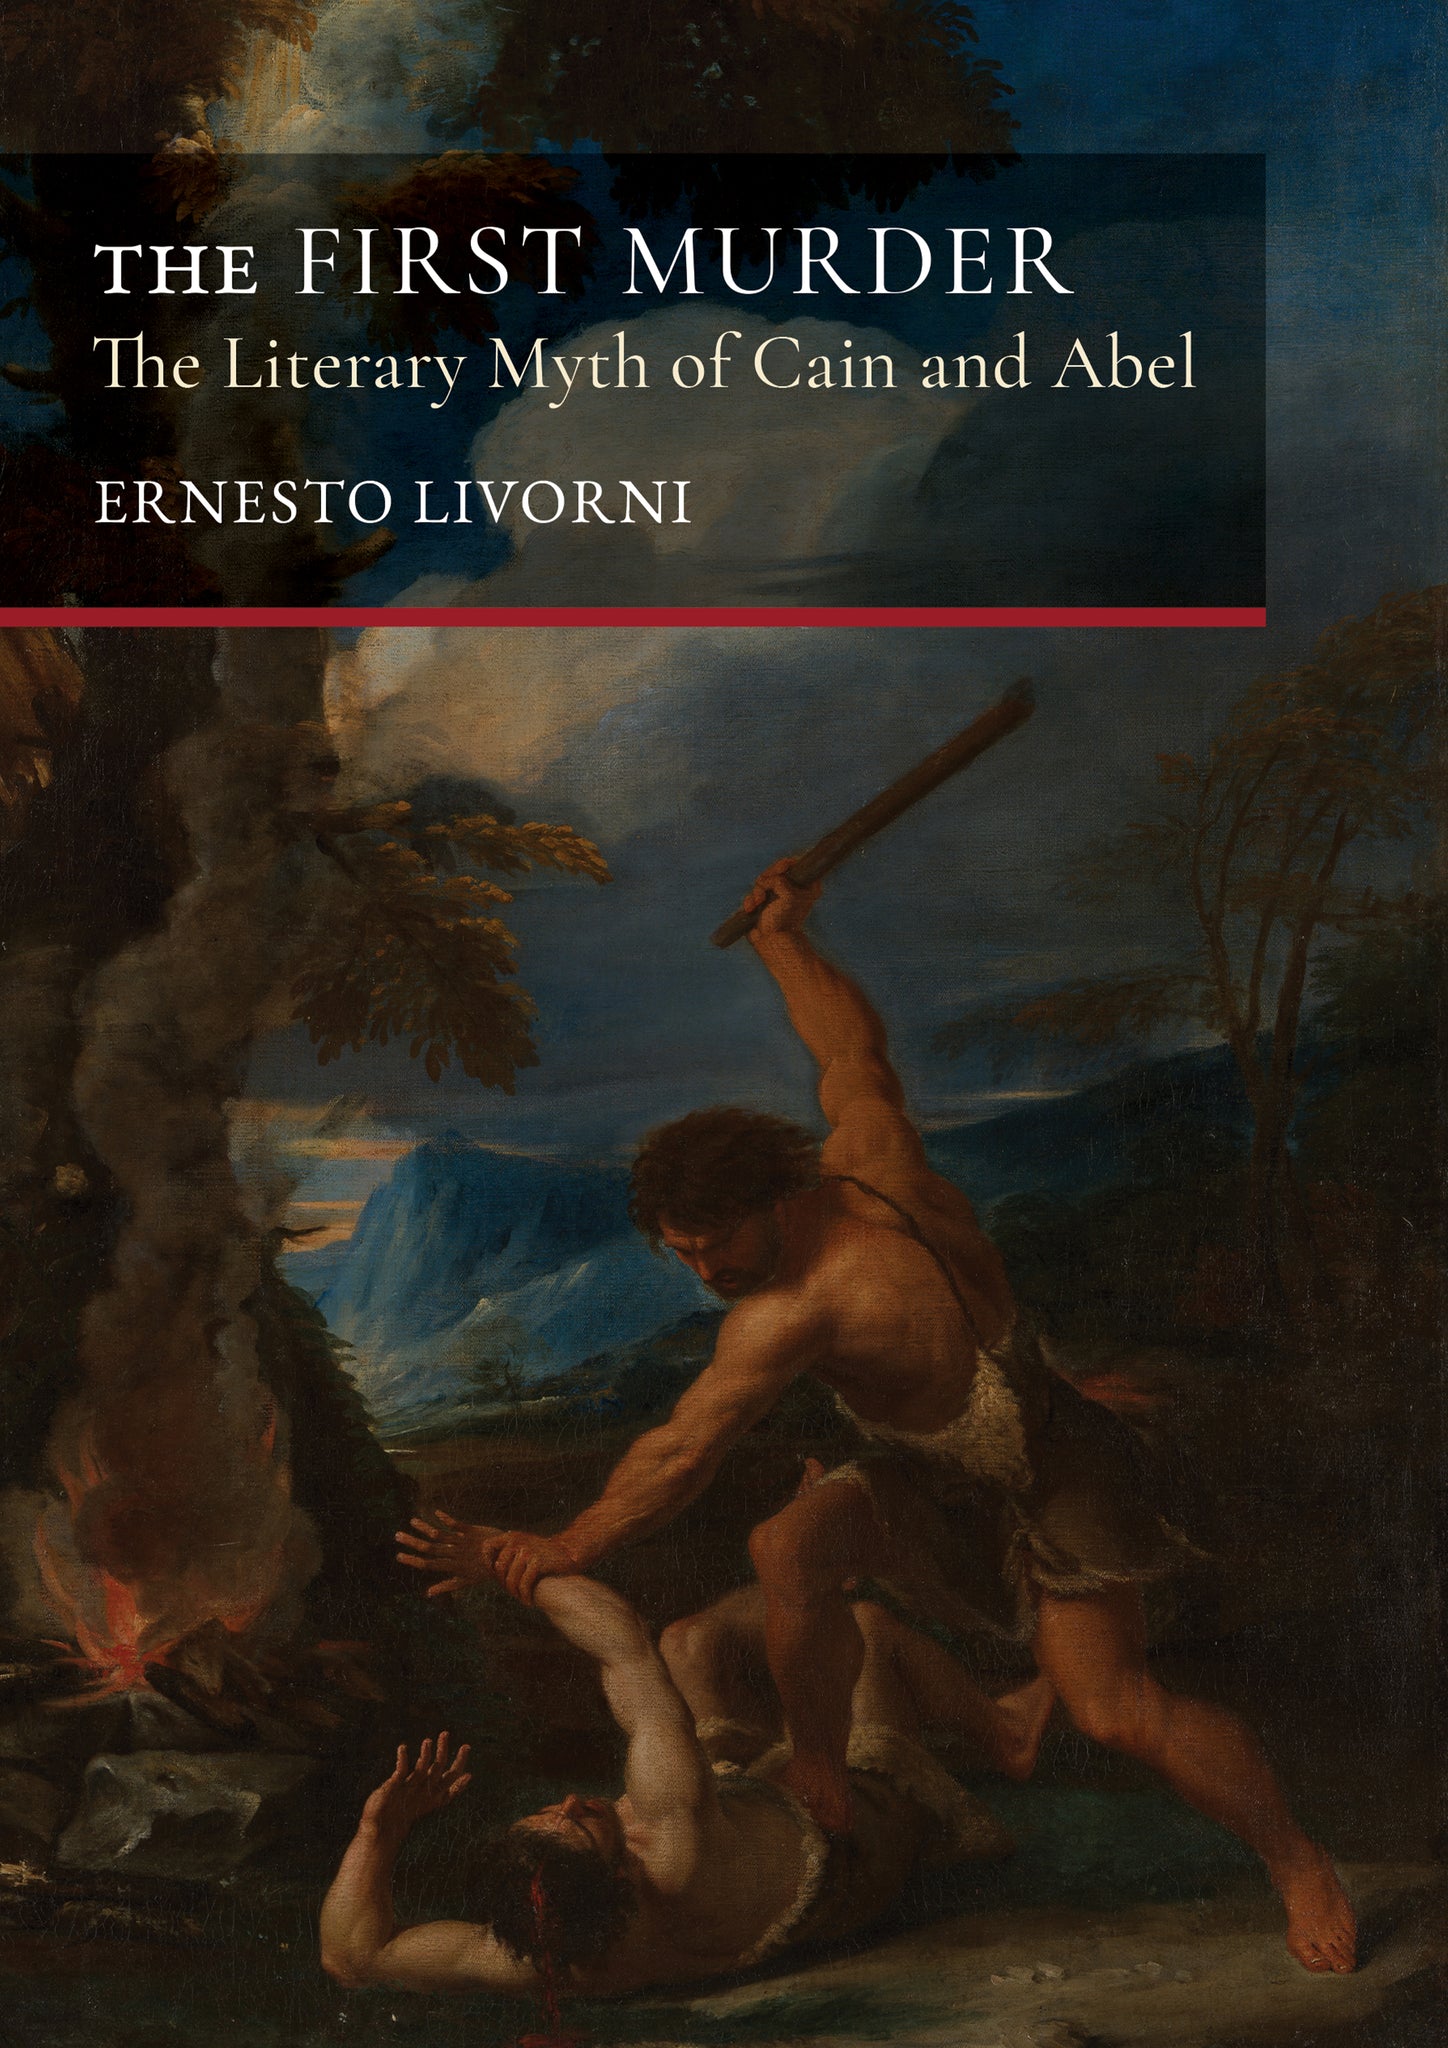 The First Murder: The Literary Myth of Cain and Abel